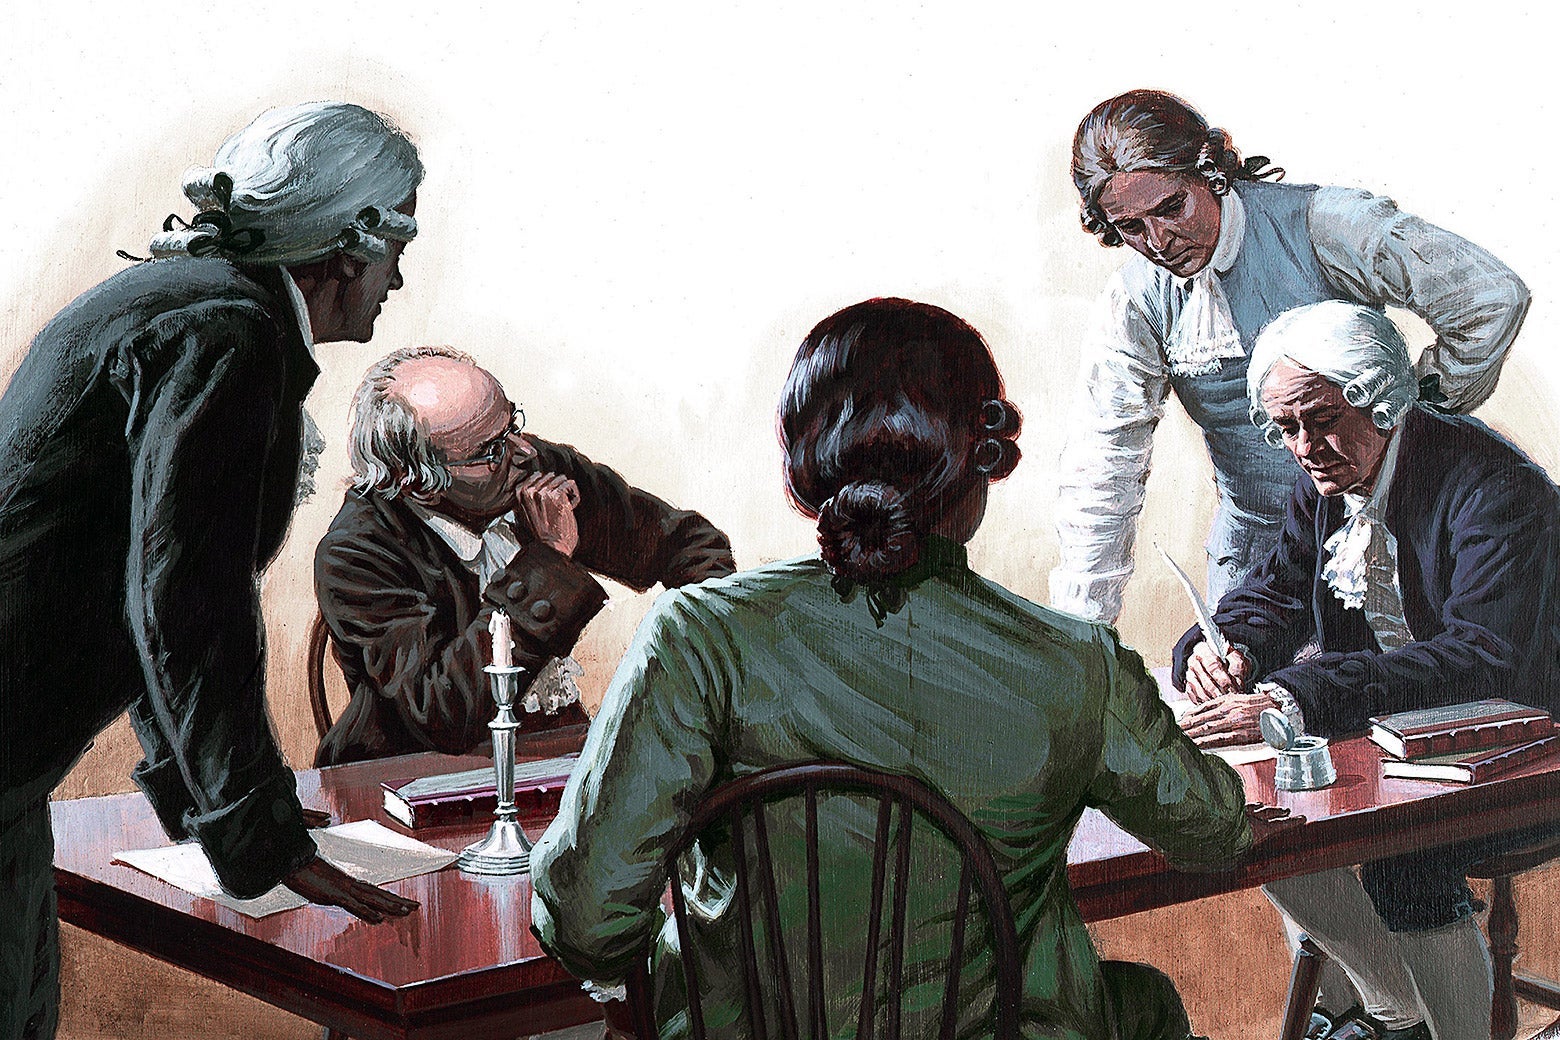 A painting depicting a group of Founding Fathers signing a document at a table during the American Revolution circa 1776.